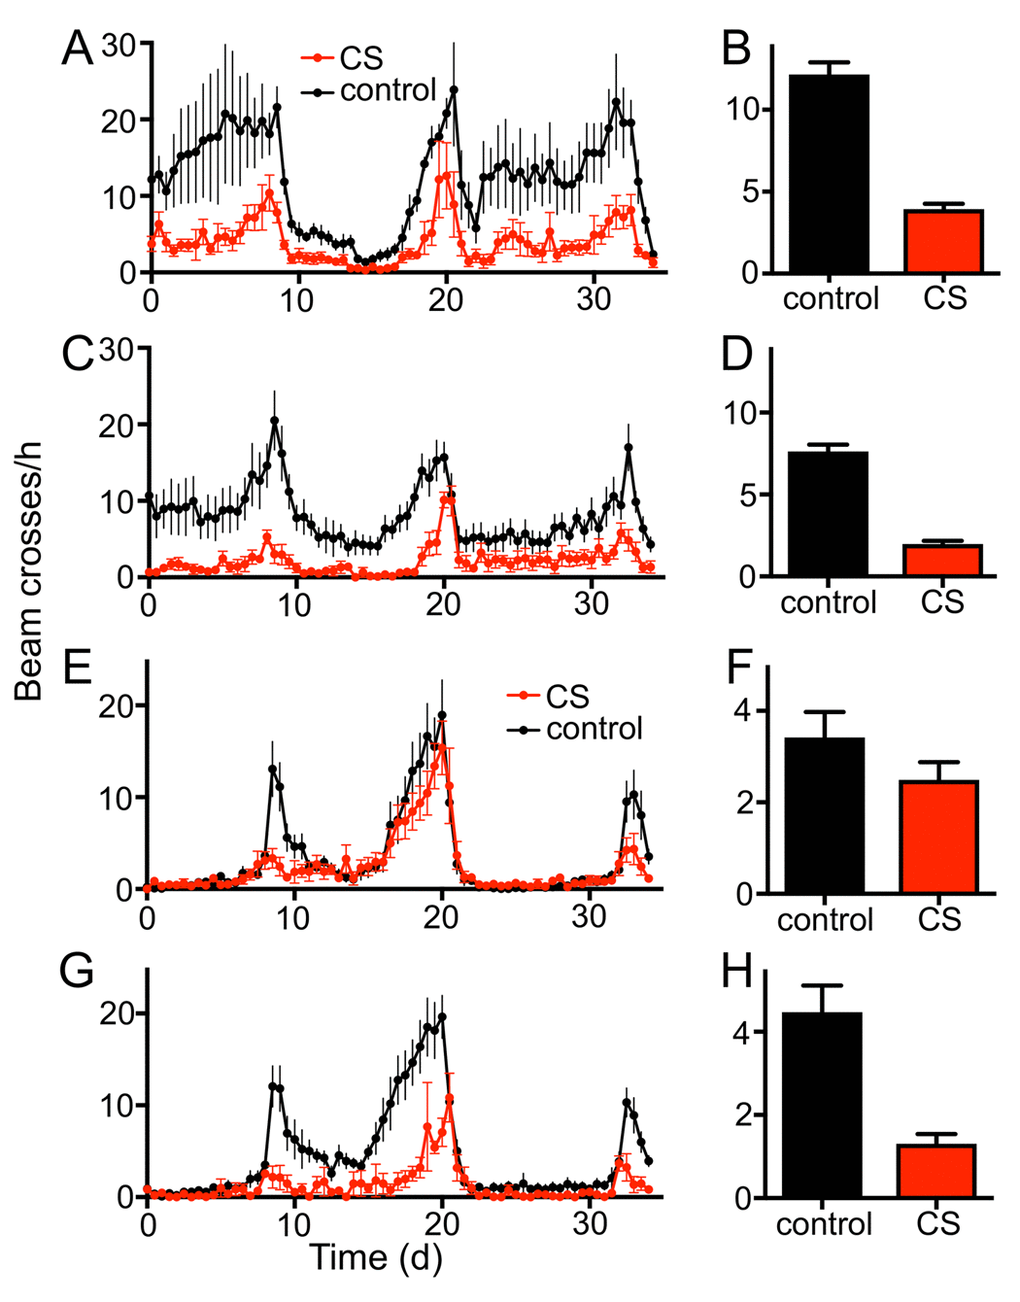 Chronic CS exposure reduces the locomotor activity of male and female w1118 flies. Effect of 7d CS exposure on the locomotor activity (A, 36 hour period, B mean values) of male flies (pC, 36 hour period, D mean values). Effects of 7d CS exposure on the locomotor activity (E, 36 hour period, F mean values) of female flies. The morning peak of 7d CS exposed female flies is almost completely diminished, while the overall activity is not significantly decreased. 14d of CS exposure affects the movement activities more severely (G, 36 hour period, H mean values, p